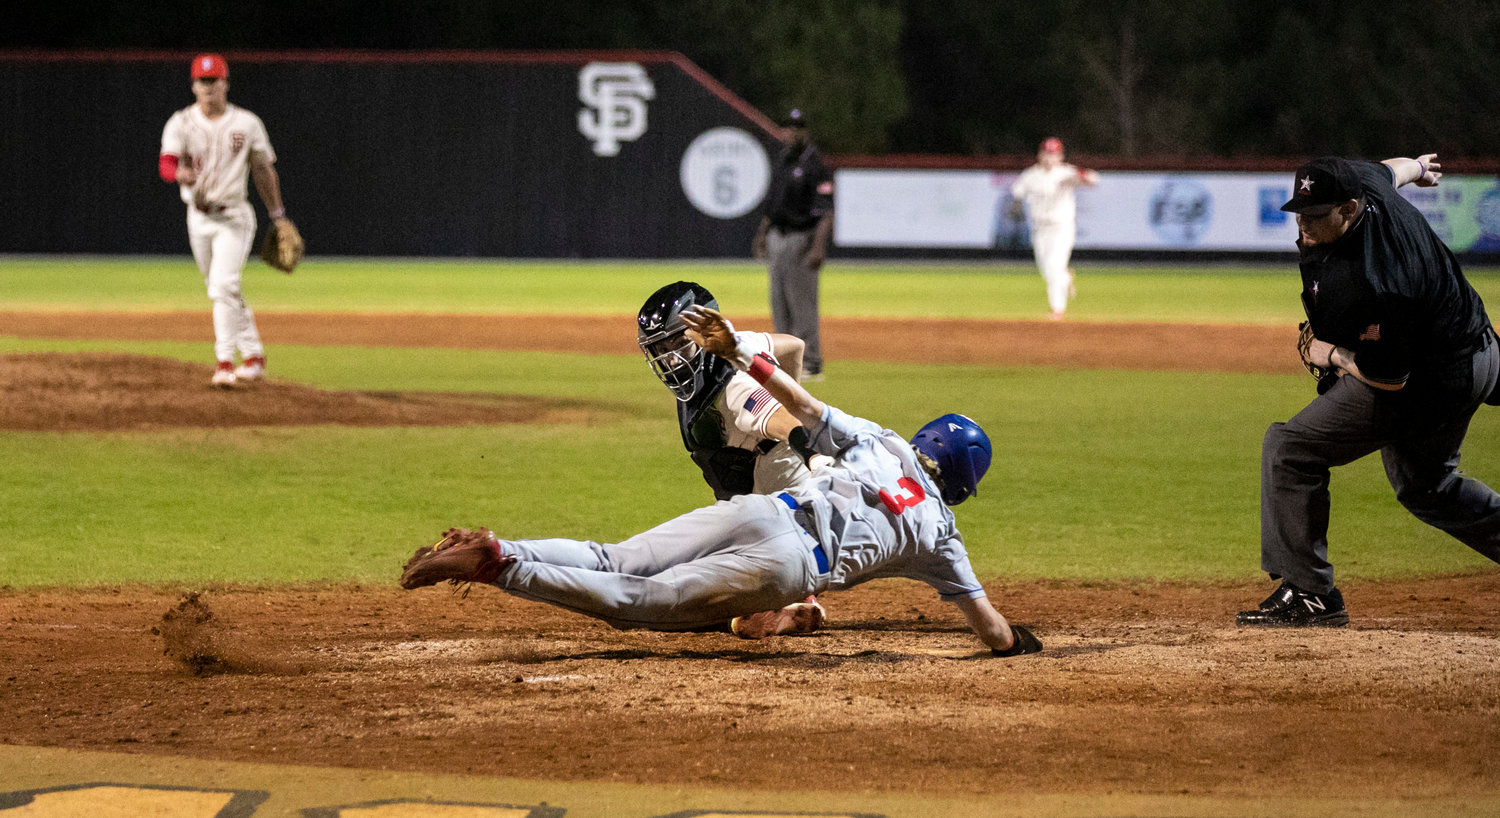 Toro catcher DJ Eurgil reaches to apply a tag on St. Paul’s 3 for an inning-ending double play during Thursday’s Opening Day contest at Spanish Fort High School. The hosts emerged victorious with a 7-4 win after they trailed 4-1 early in the game.